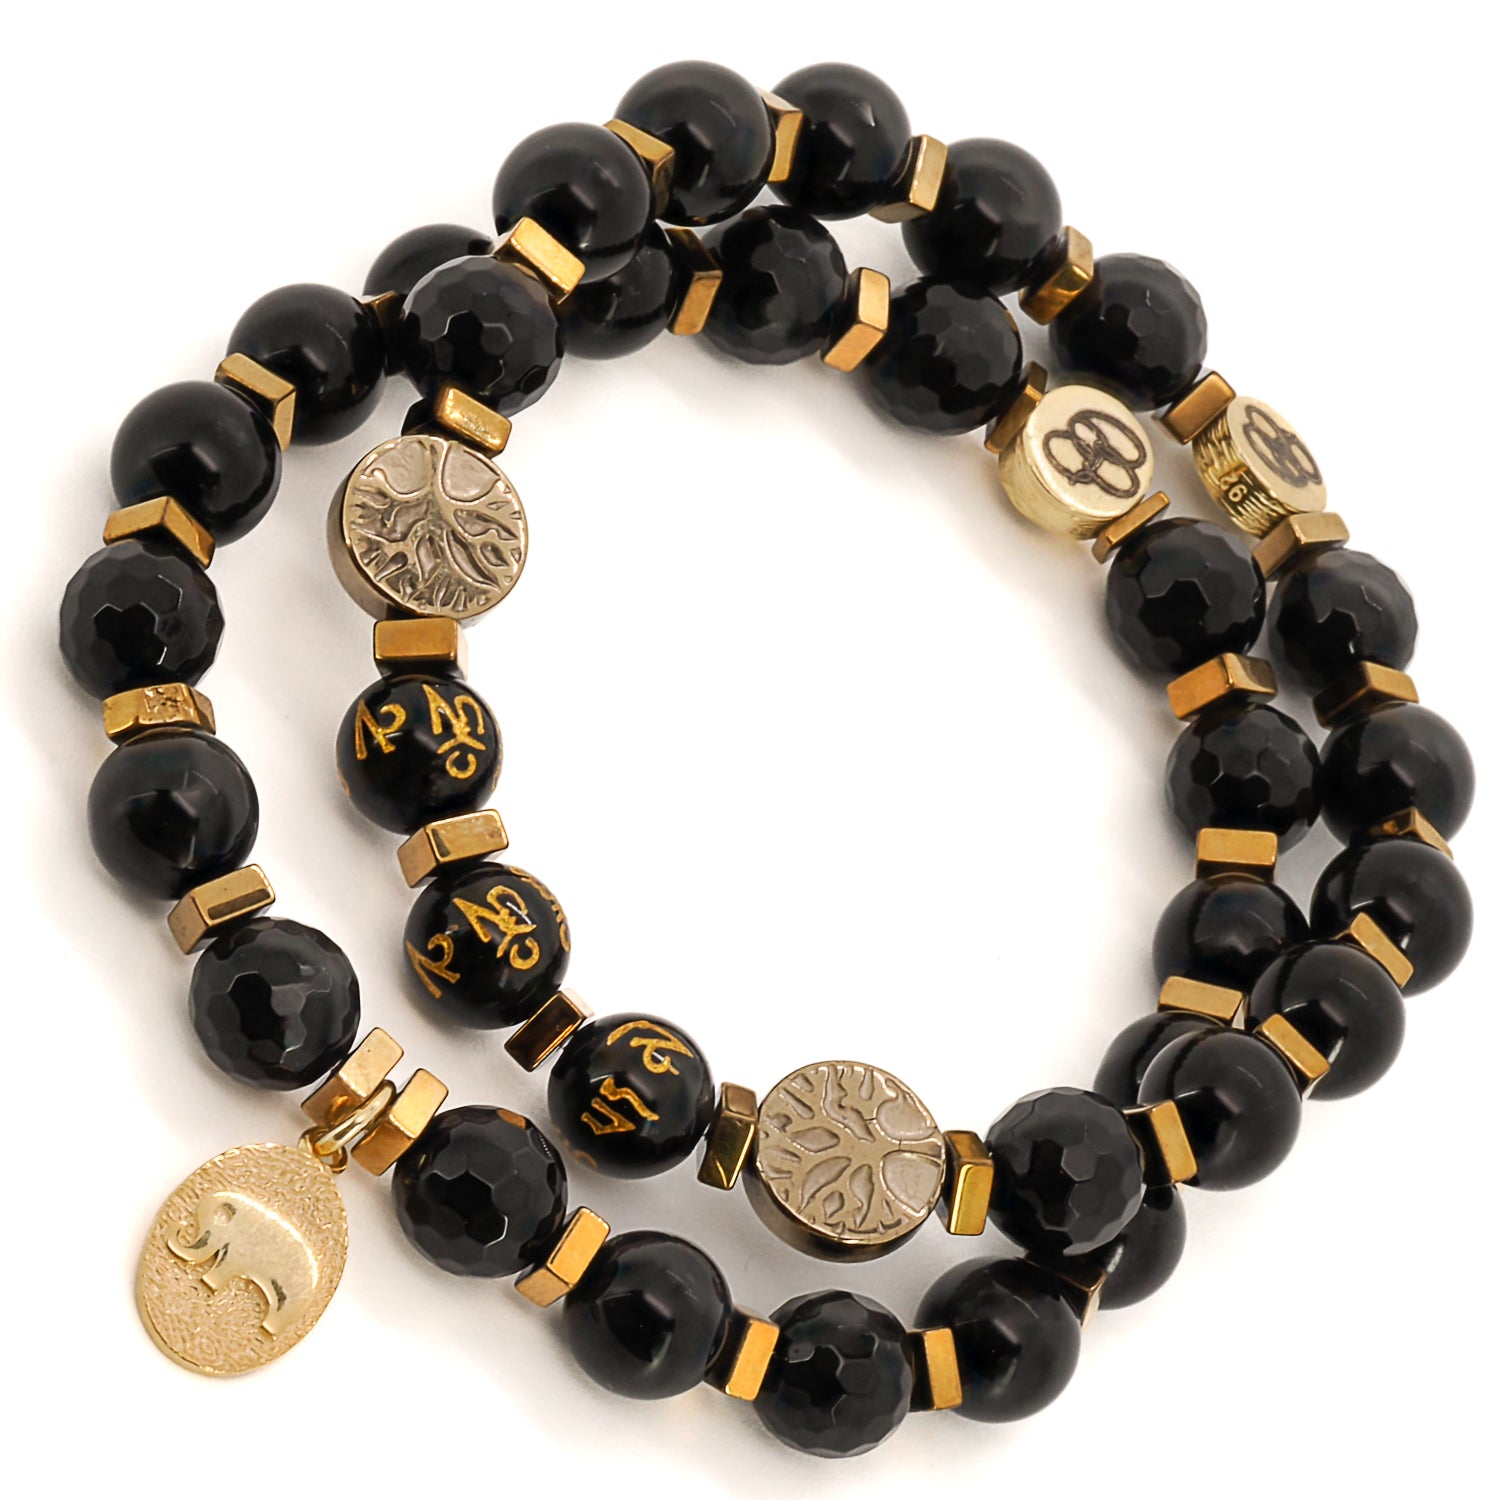 Find inner strength and focus with the Onyx Yoga Journey Bracelet Set, a handcrafted collection of jewelry designed to promote mindfulness.